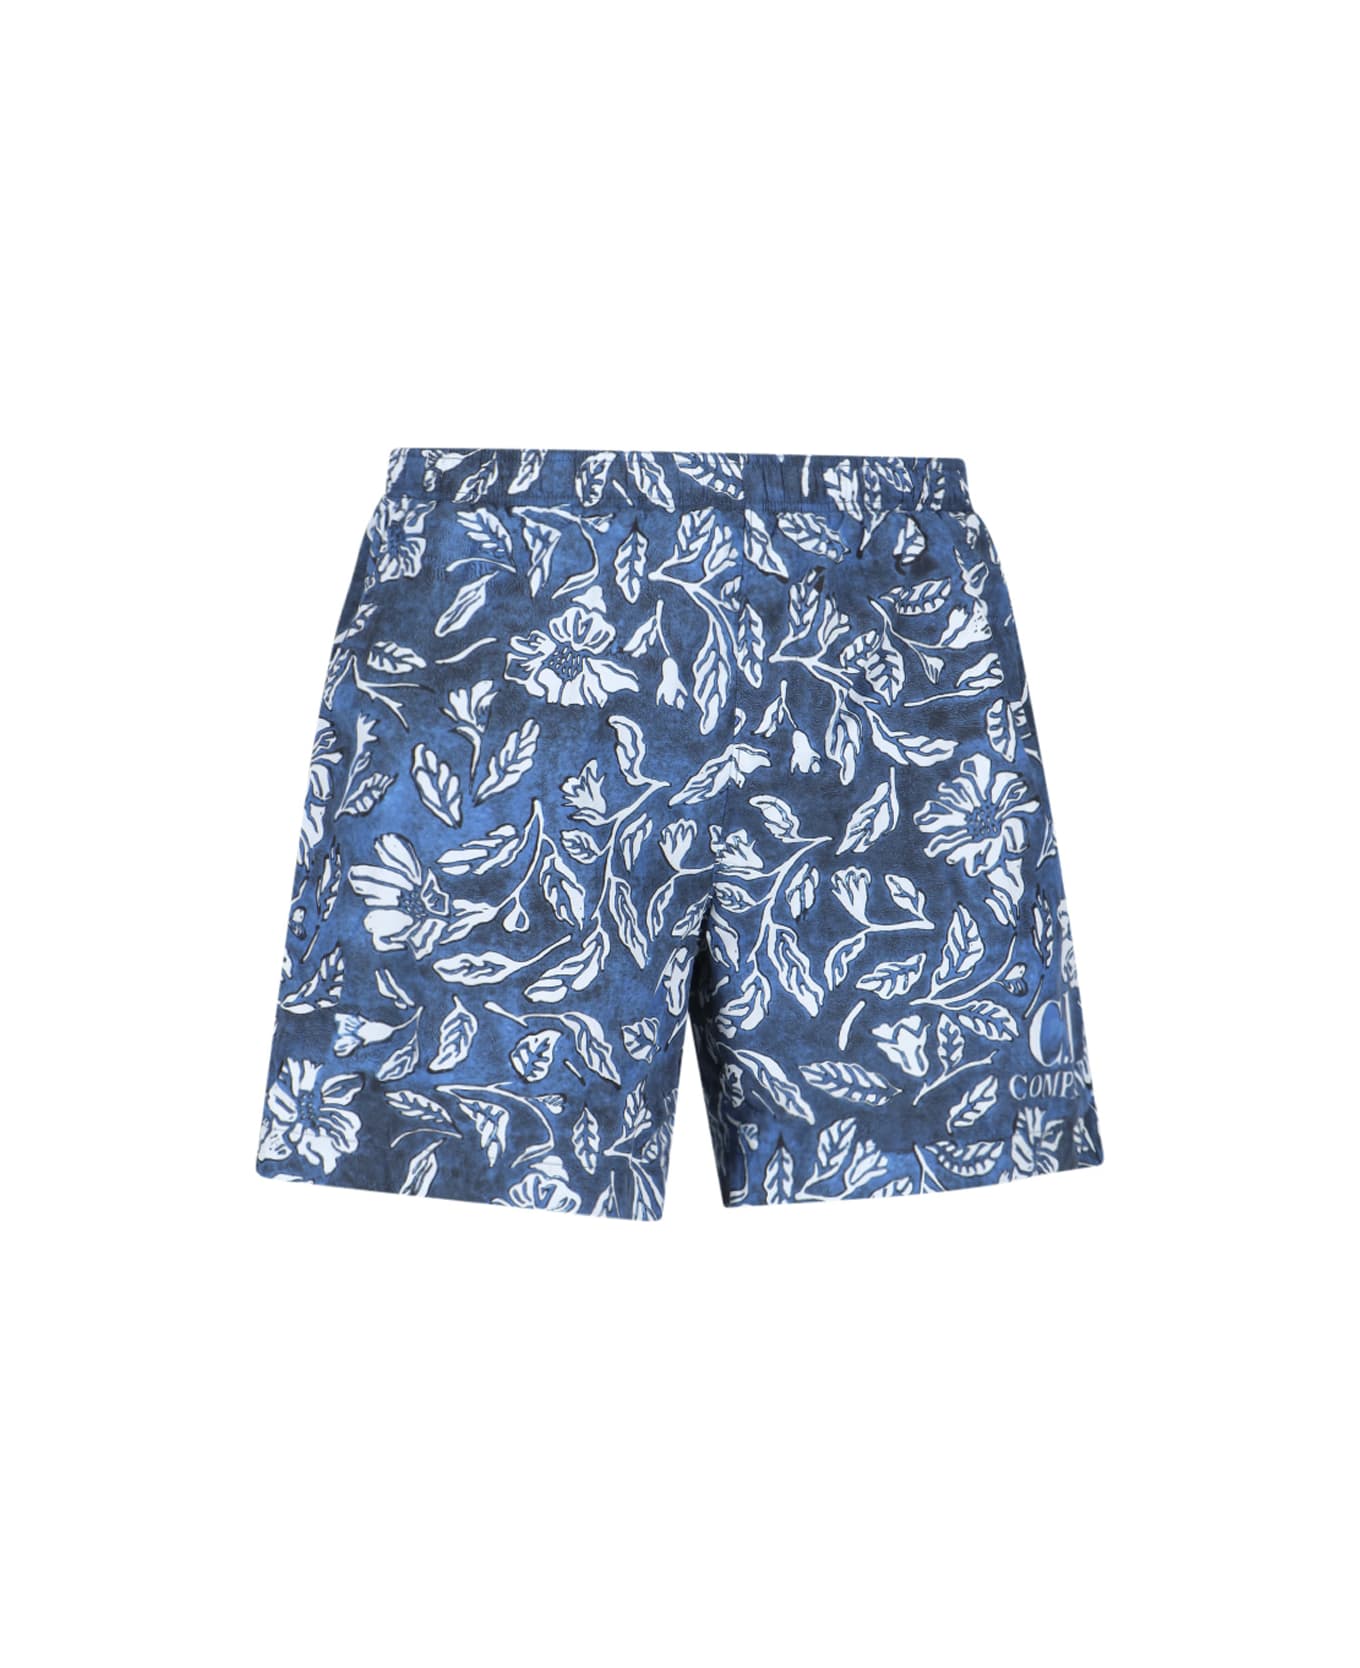 C.P. Company Floral Print Swimming Shorts - Medieval Blue